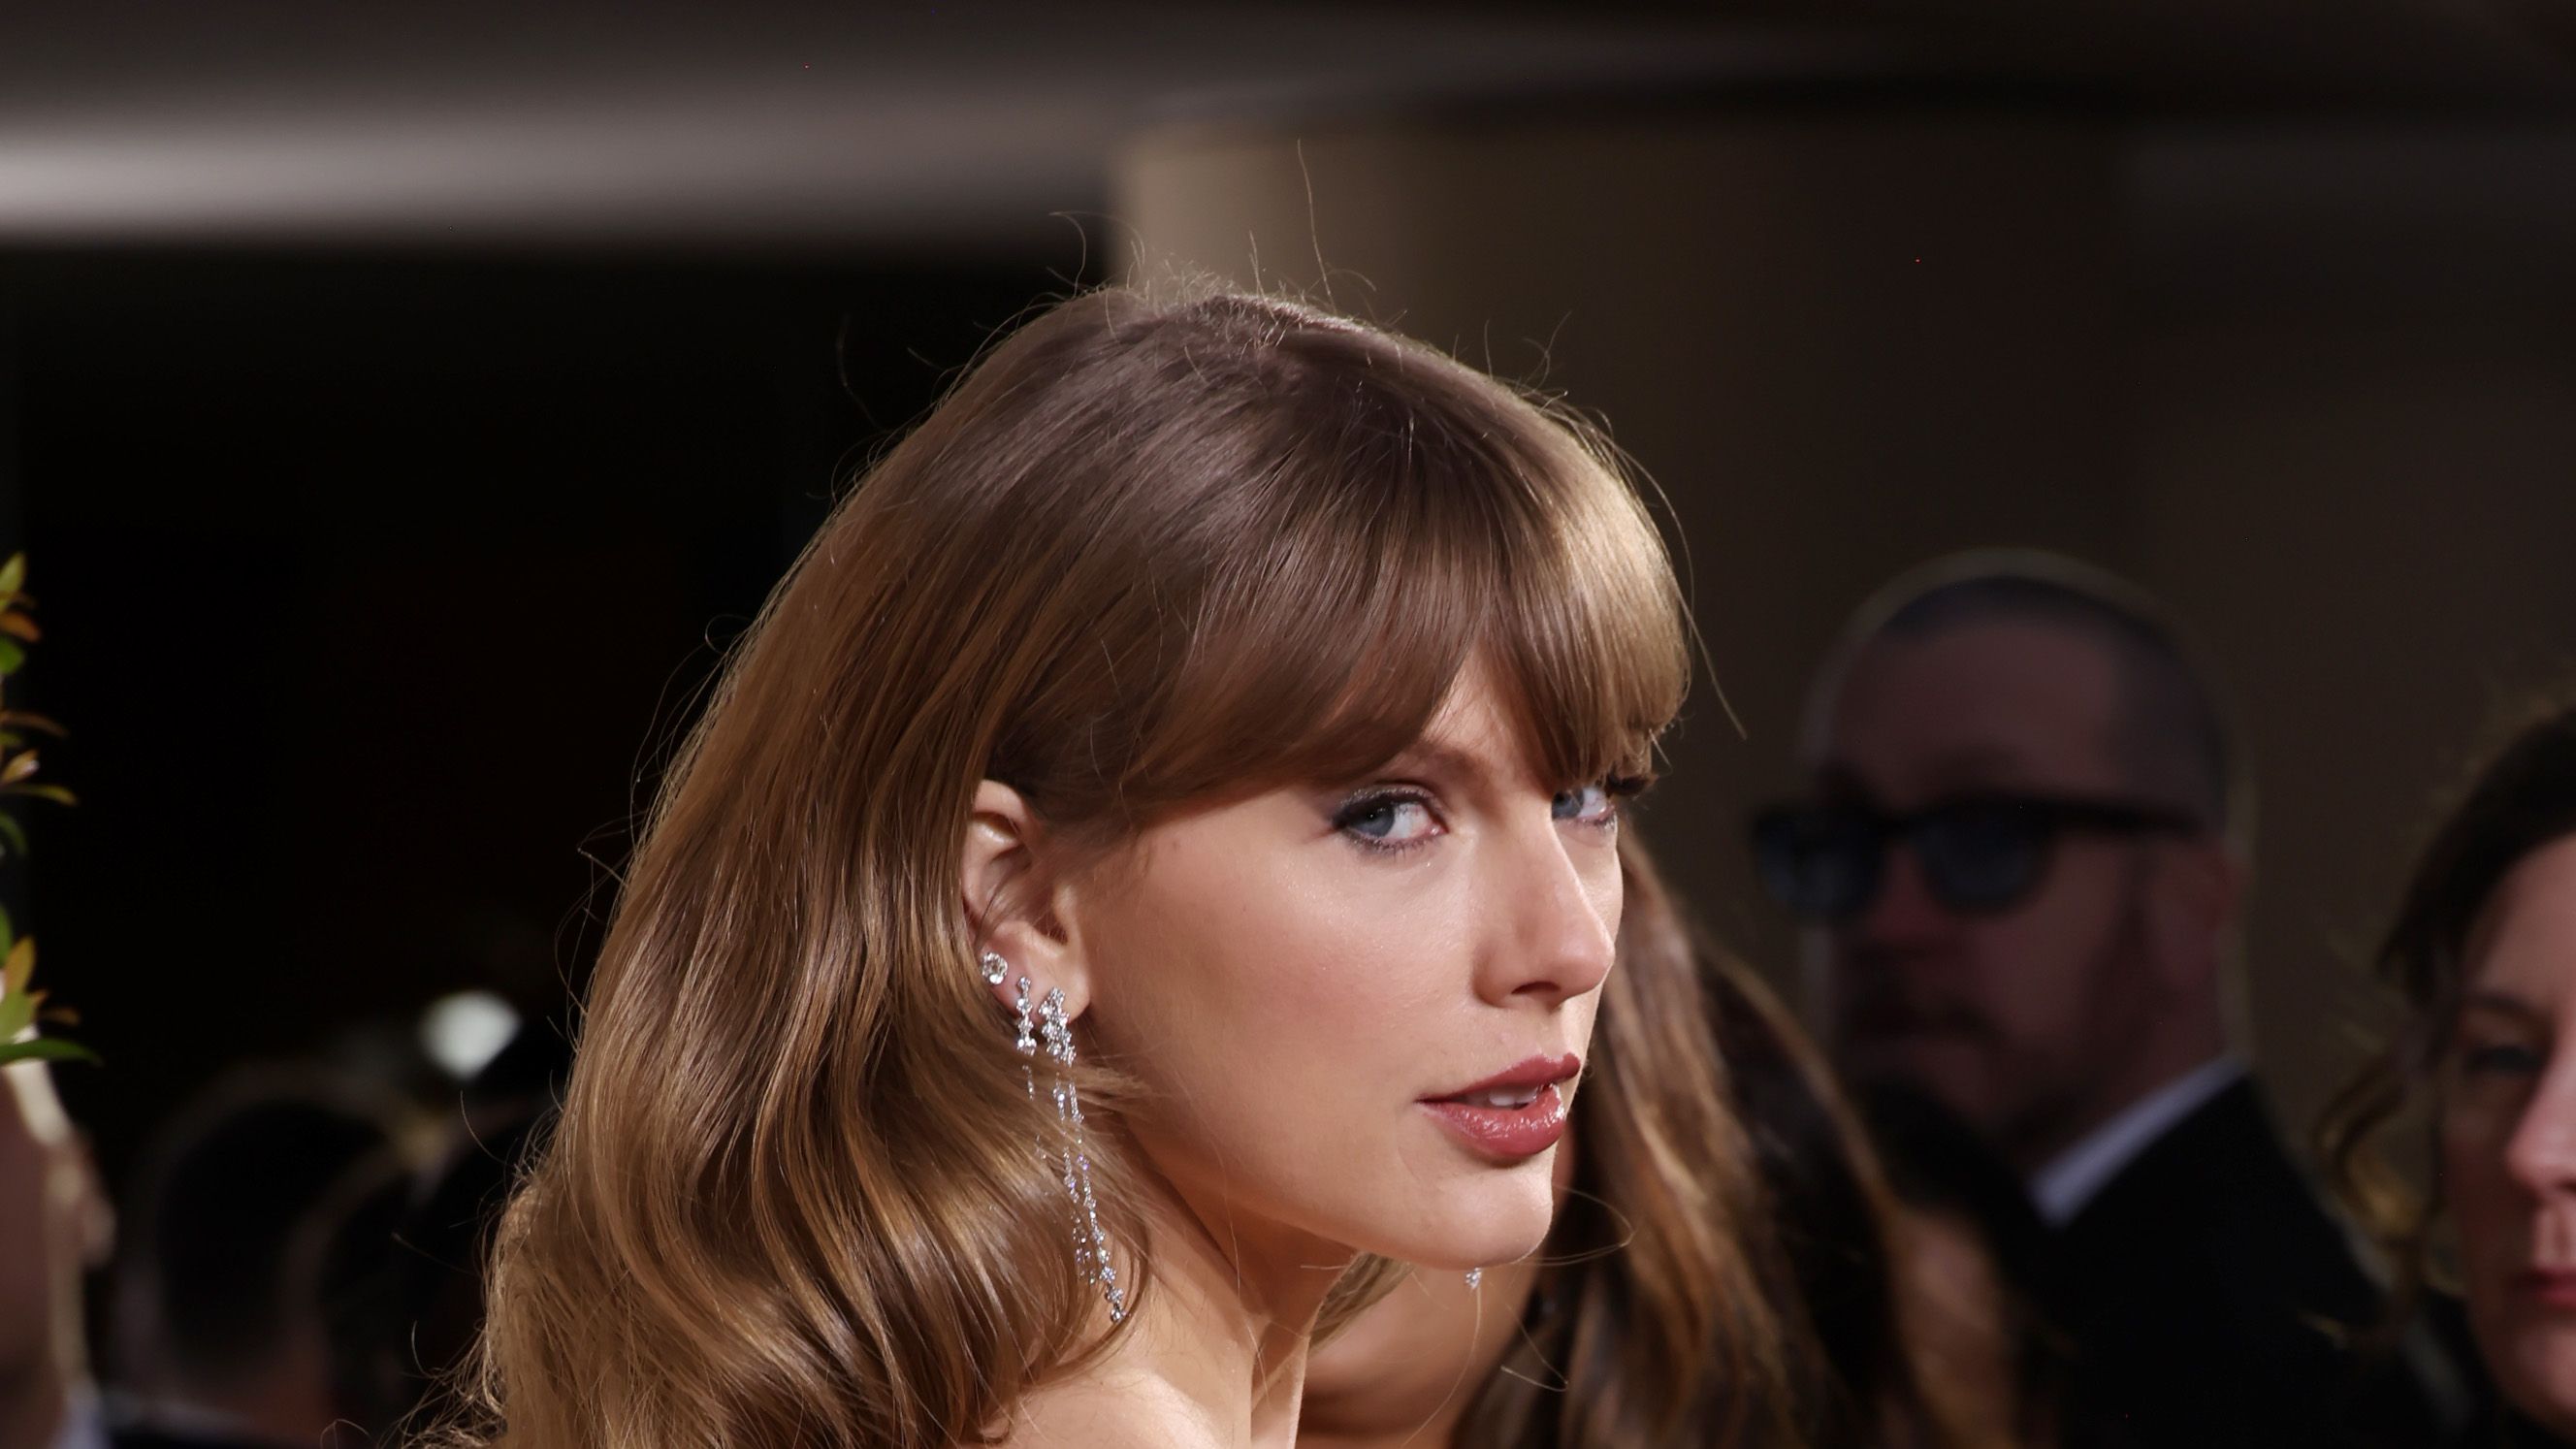 Taylor Swift Stuns in Green Dress at Golden Globes 2024